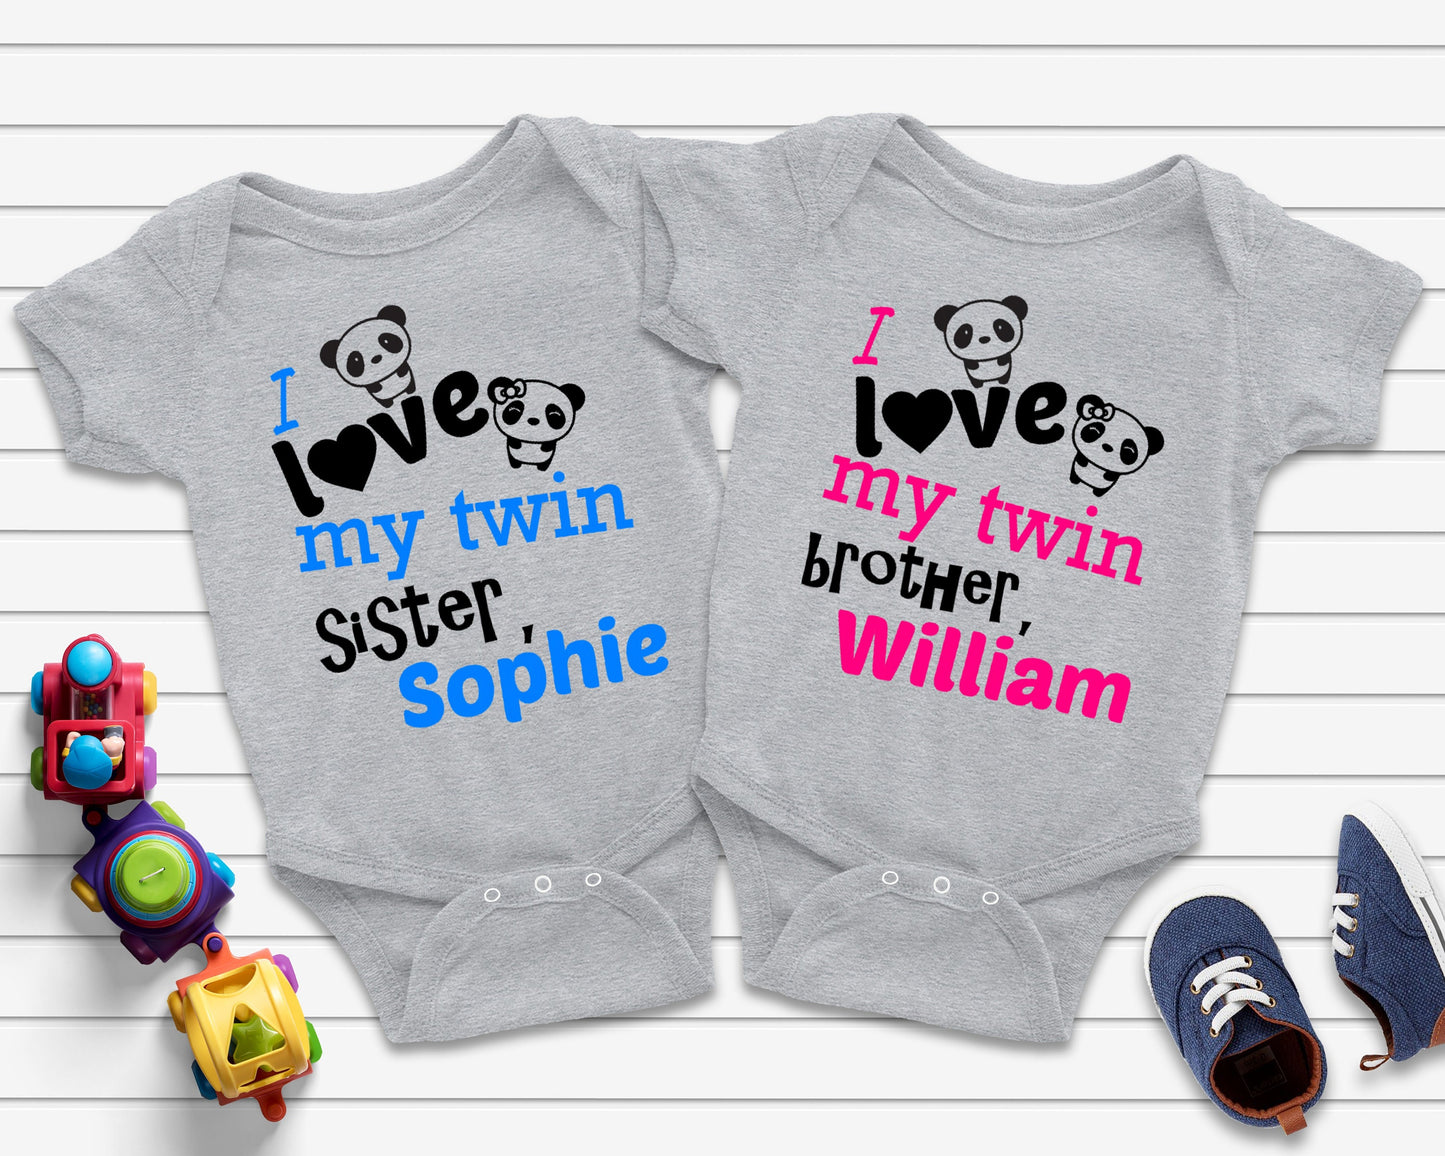 I Love My Twin Boy Girl Twins T-Shirts or Bodysuits for Twins - Fraternal Twins - Brother and Sister Tees - boy girl twin tees